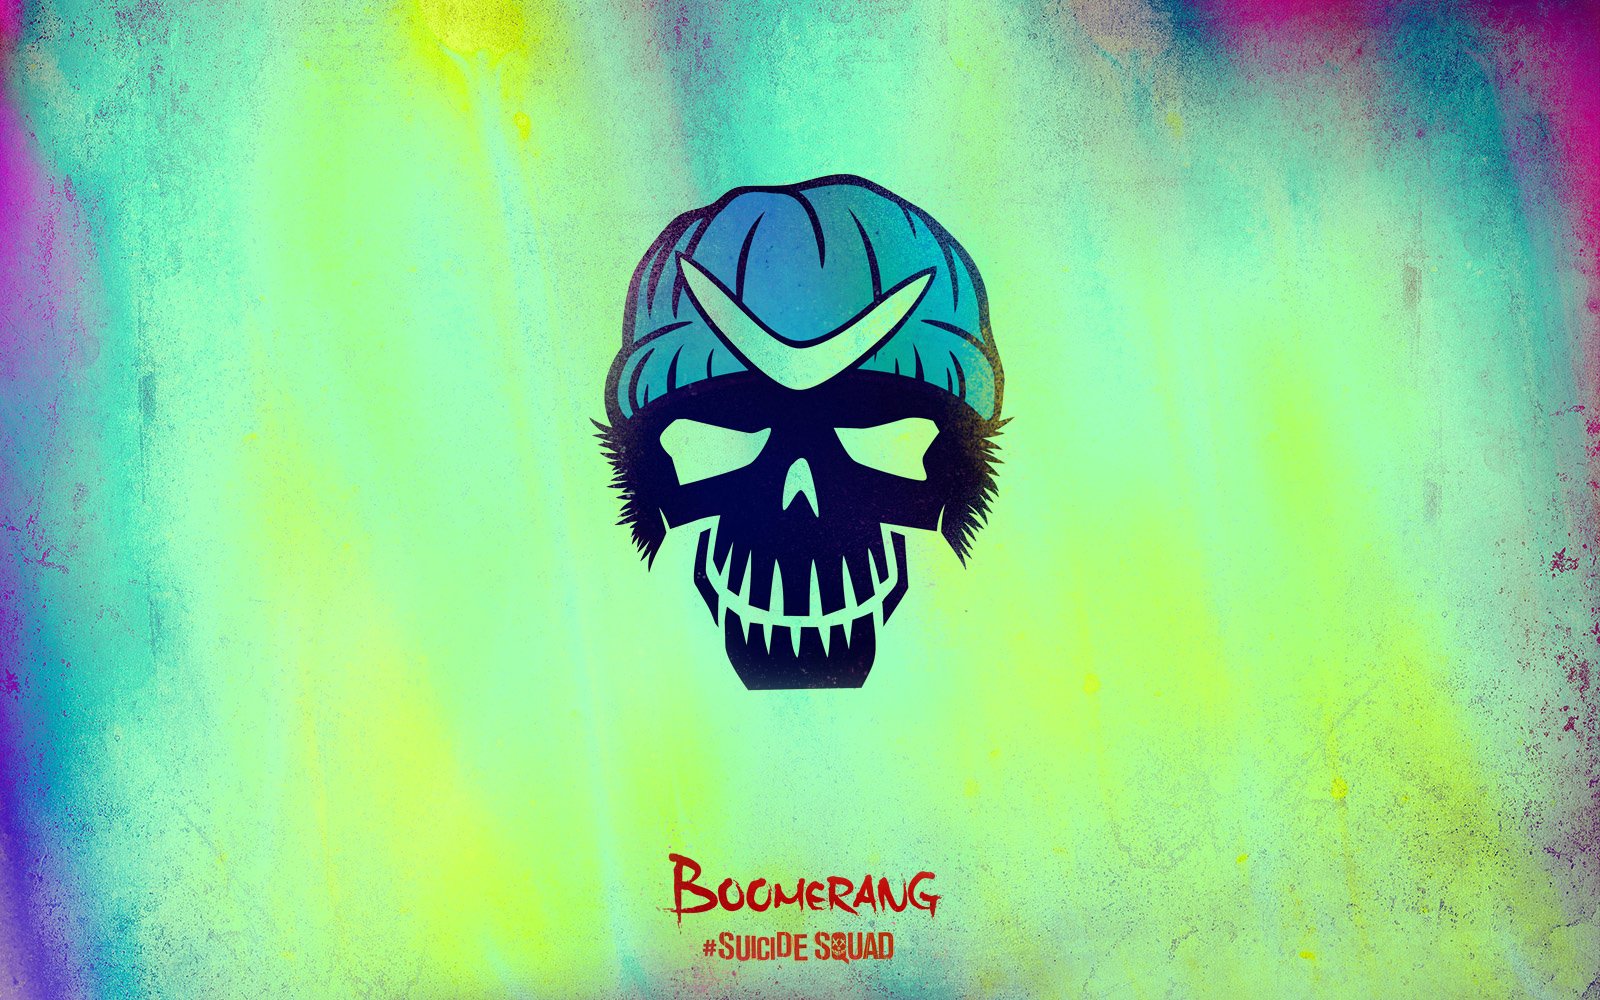 Boomerang captain The Suicide